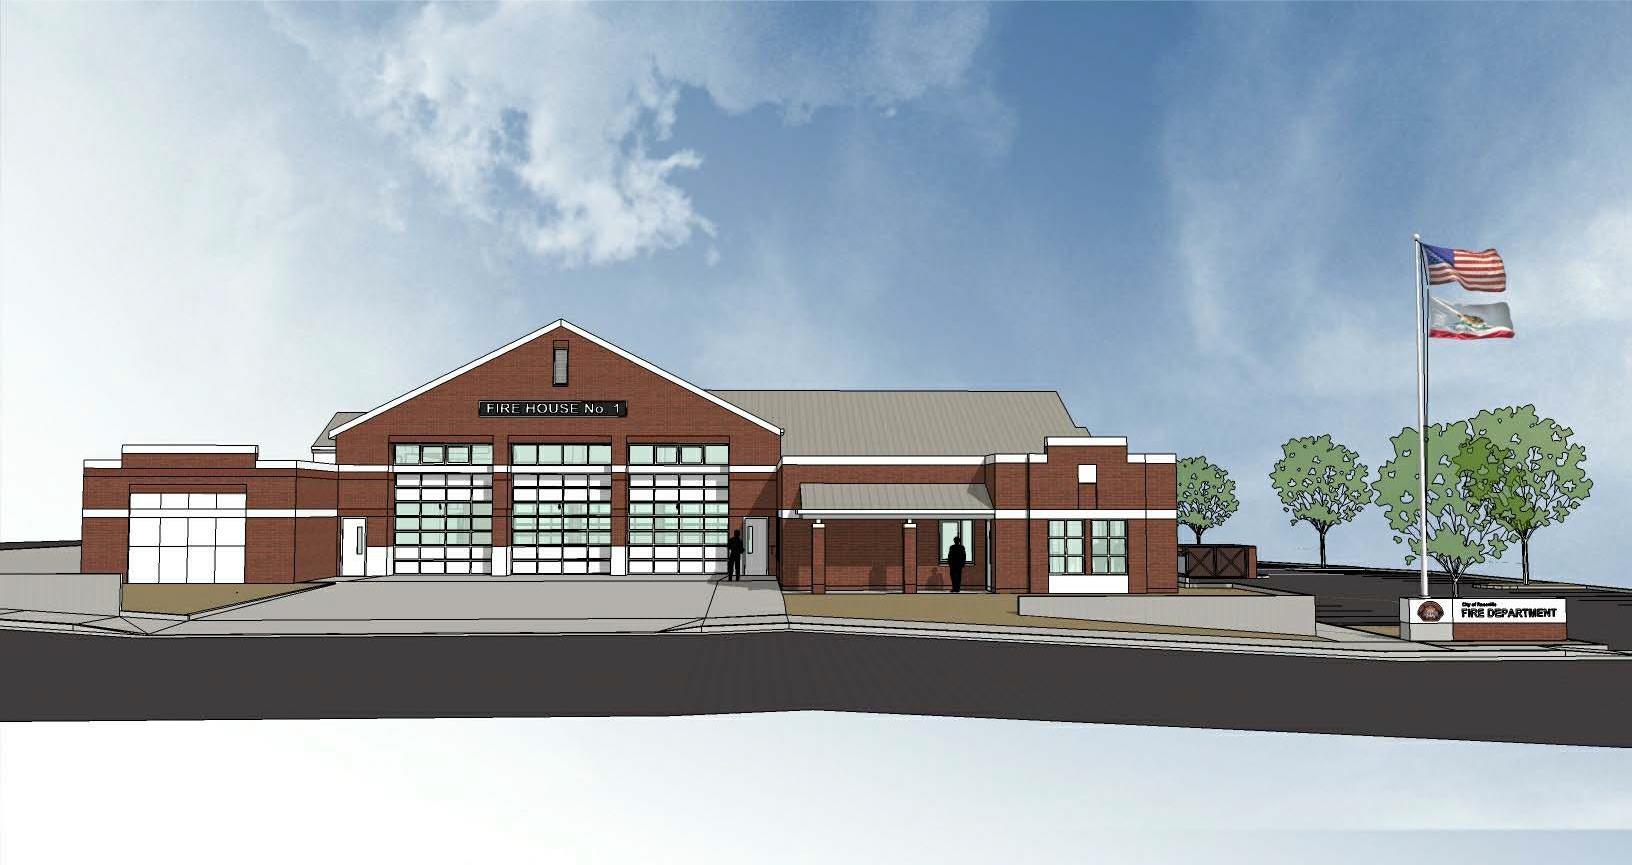 CITY OF ROSEVILLE - RELOCATION OF HISTORIC FIRE STATION NO. 1